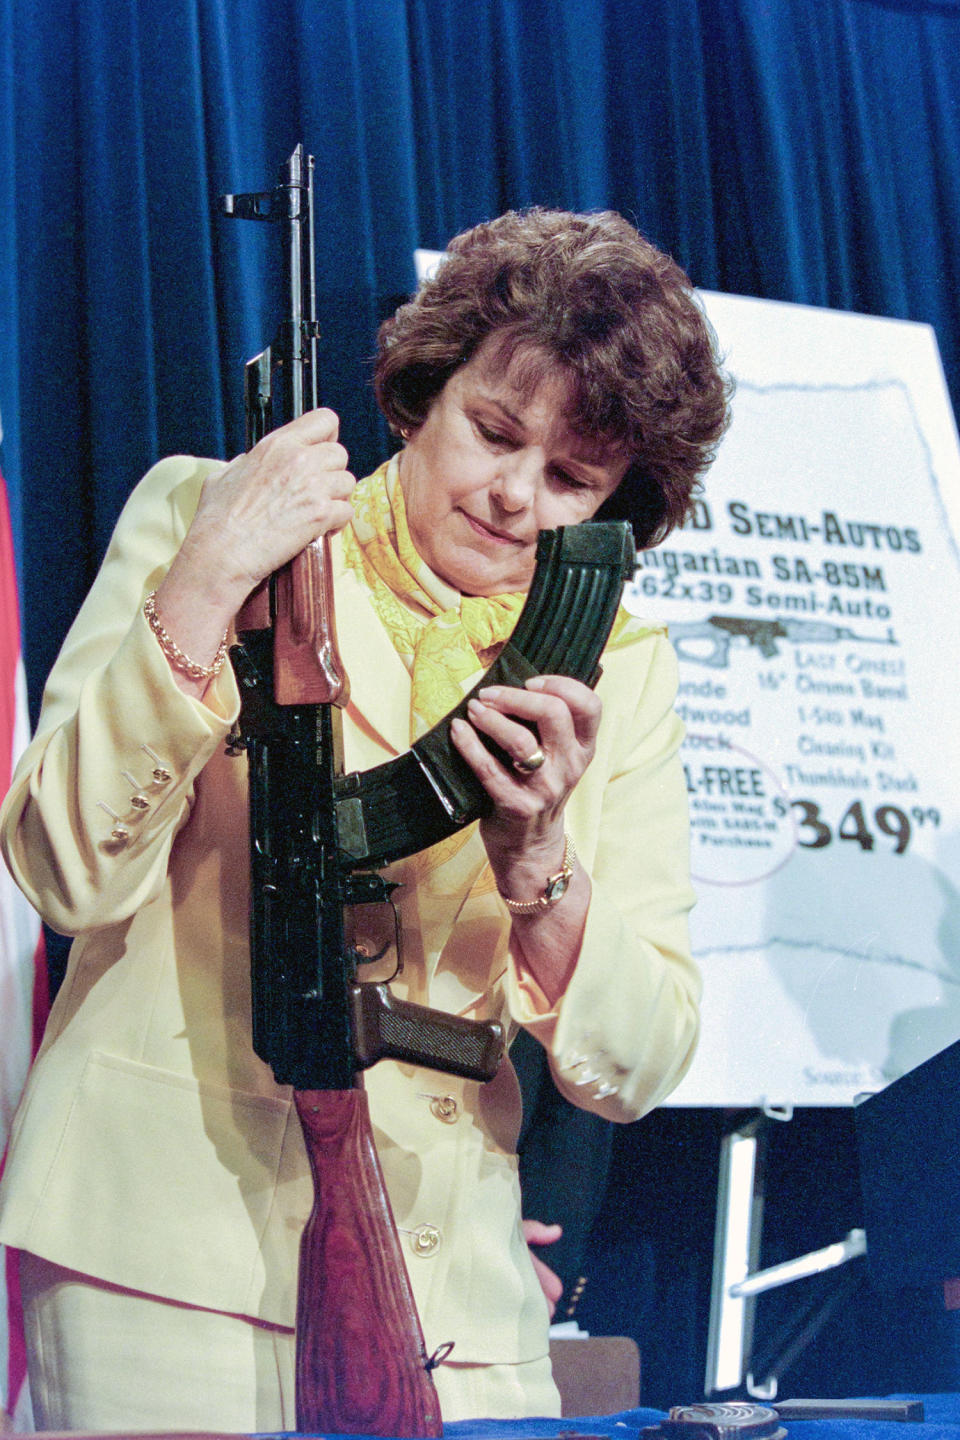 W5WRYF U.S Senator Dianne Feinstein, of California demonstrates an AK-47 military style assault weapons during a press conference on Capitol Hill March 22, 1998 in Washington D.C,. The Republican lead House of Representatives voted to lift the assault-type weapons ban by a vote of 239-173, but President Bill Clinton Administration has vowed to veto the measure. (Richard Ellis / Alamy file)